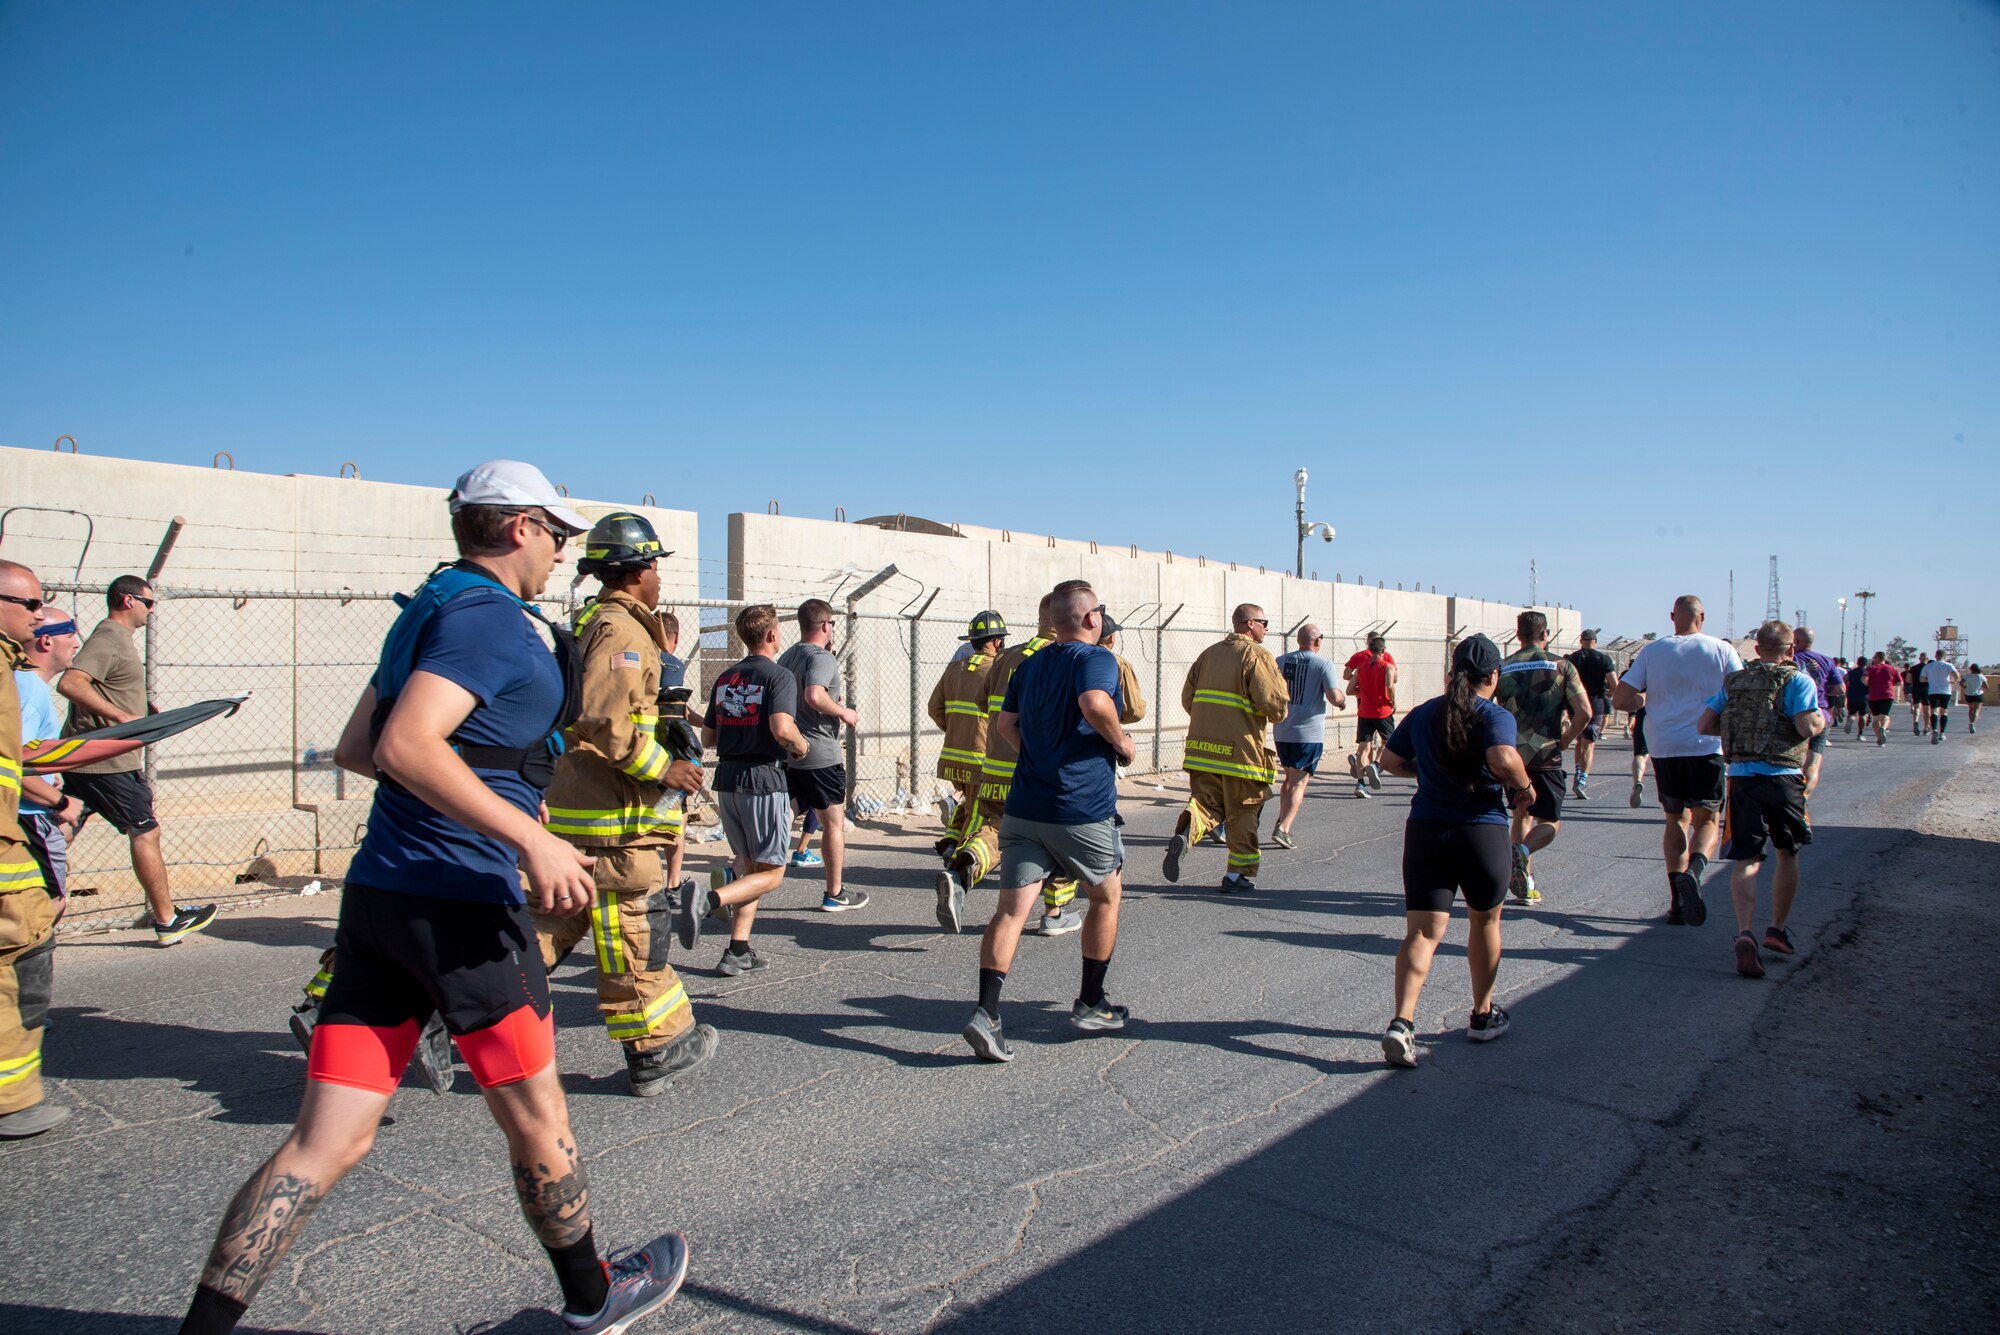 Airmen with the 332d Air Expeditionary Wing participate in a Patriot Day 5k run at an undisclosed location in Southwest Asia, Sept. 11, 2022. Patriot Day is a holiday memorializing the lives lost in the terrorist attacks September 11, 2001, and honoring those who have fought in the Global War on Terror ever since. (U.S. Air Force photo by: Tech. Sgt. Jim Bentley)